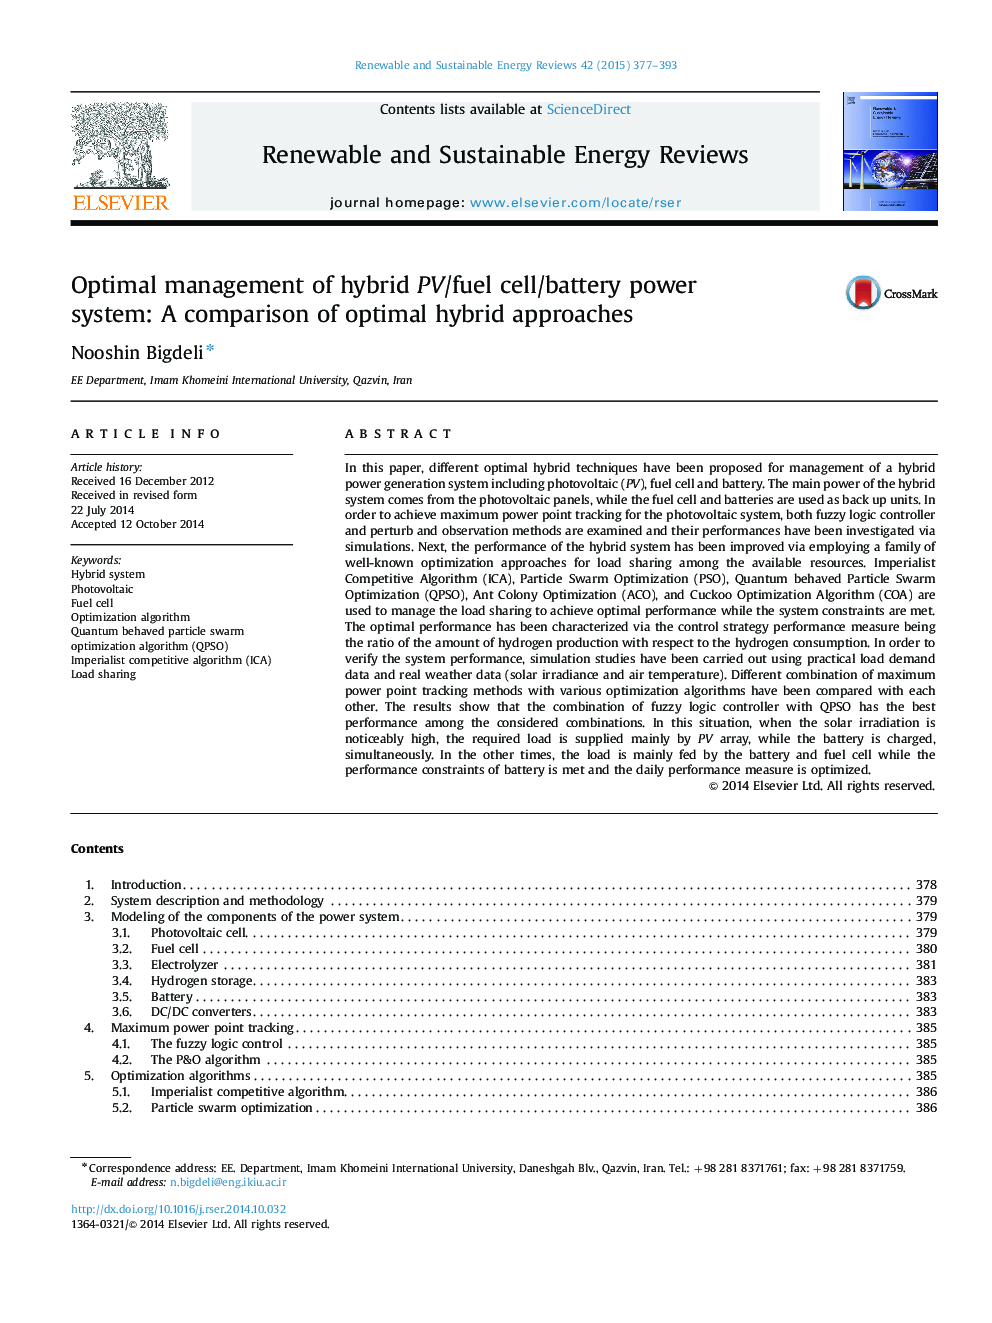 Optimal management of hybrid PV/fuel cell/battery power system: A comparison of optimal hybrid approaches